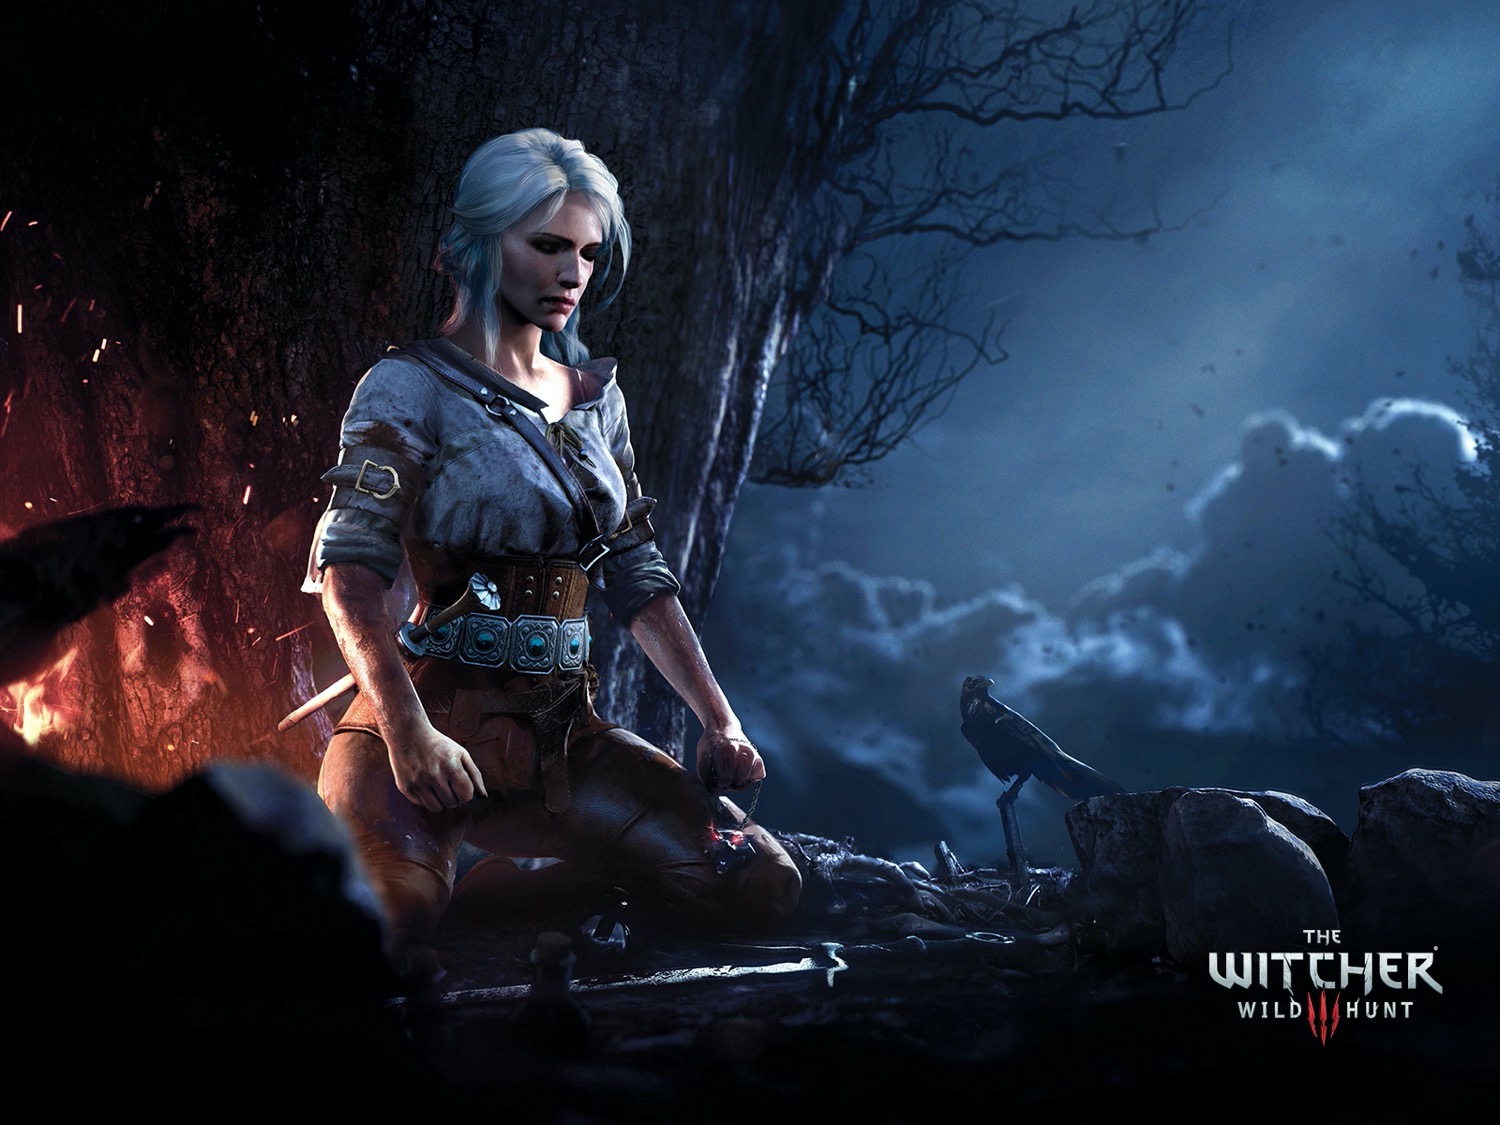 The Witcher 3 Player Count Surpasses Launch Day Numbers Following Release  Of Netflix Series